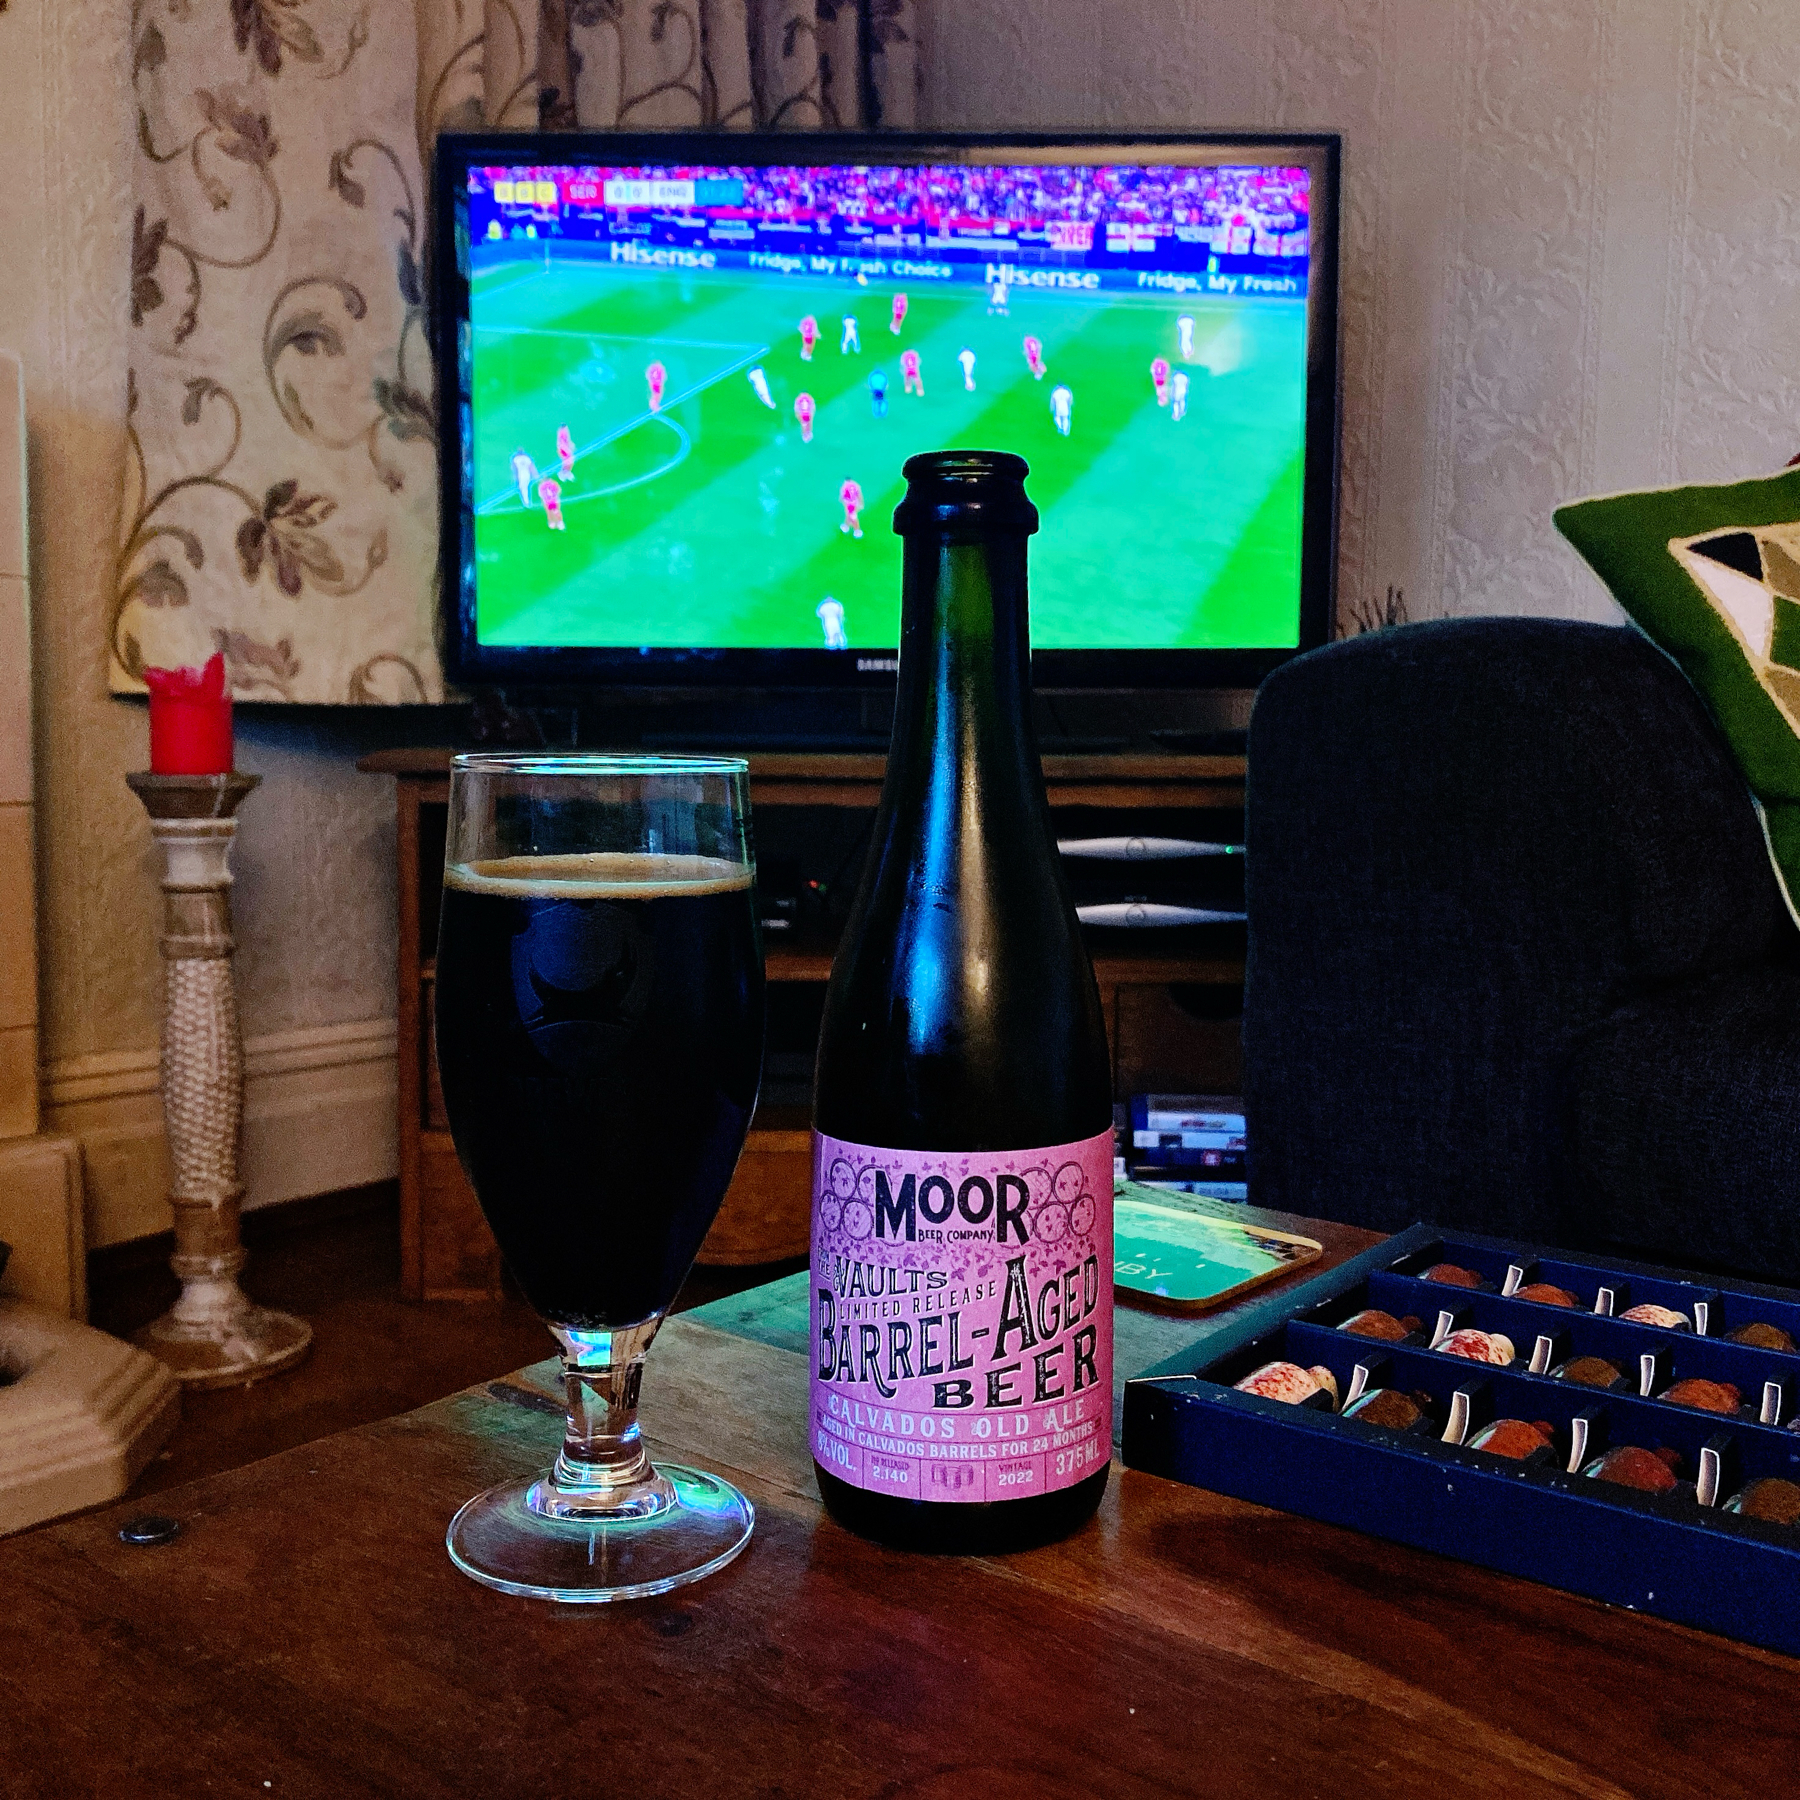 A glass and a bottle of Moor Vaults limited release barrel-aged beer are on a wooden coffee table. A tray of assorted chocolates is also on the table. In the background, a television screen shows a soccer match being played.